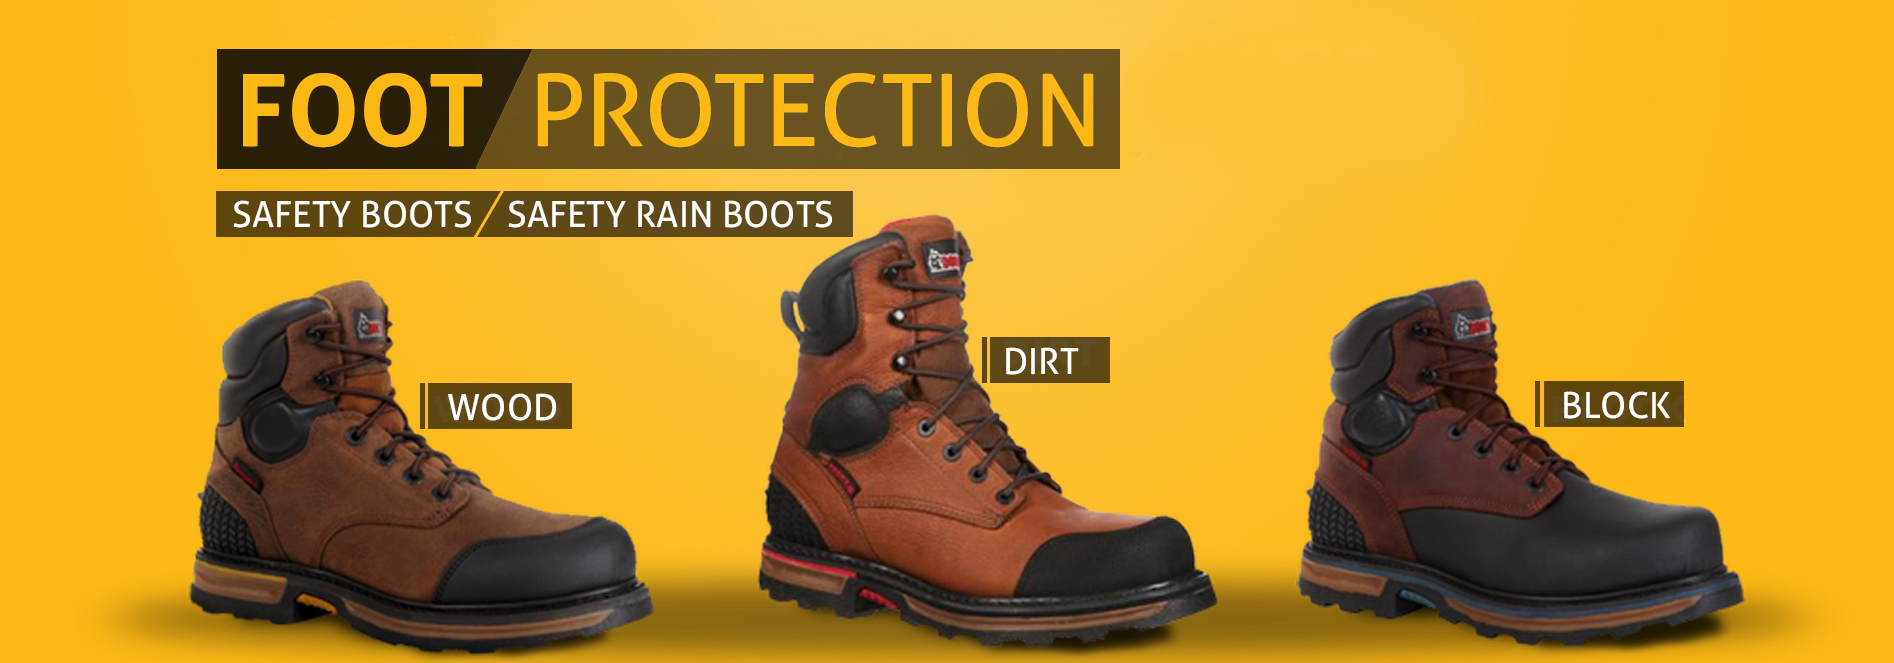 FOOT PROTECTION | Al Asayel Health & Safety